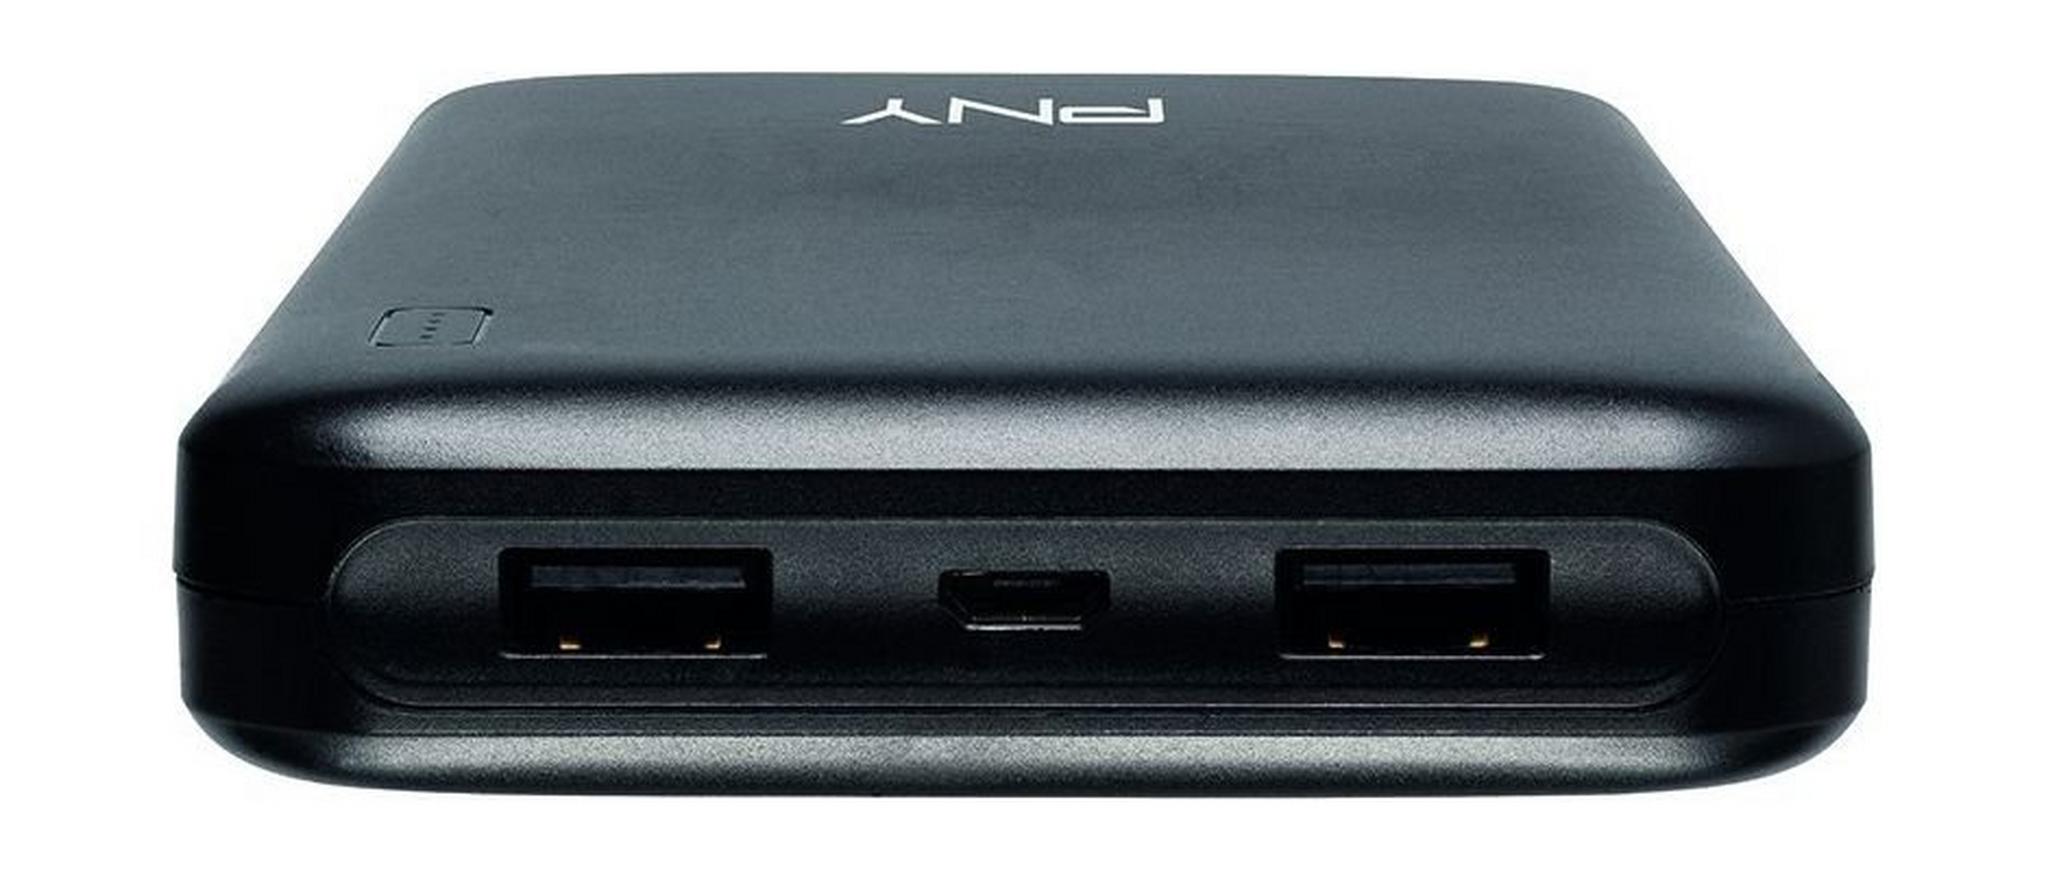 PNY Slim 10000 mAh PowerPack Portable Smartphone Battery Charger - Black